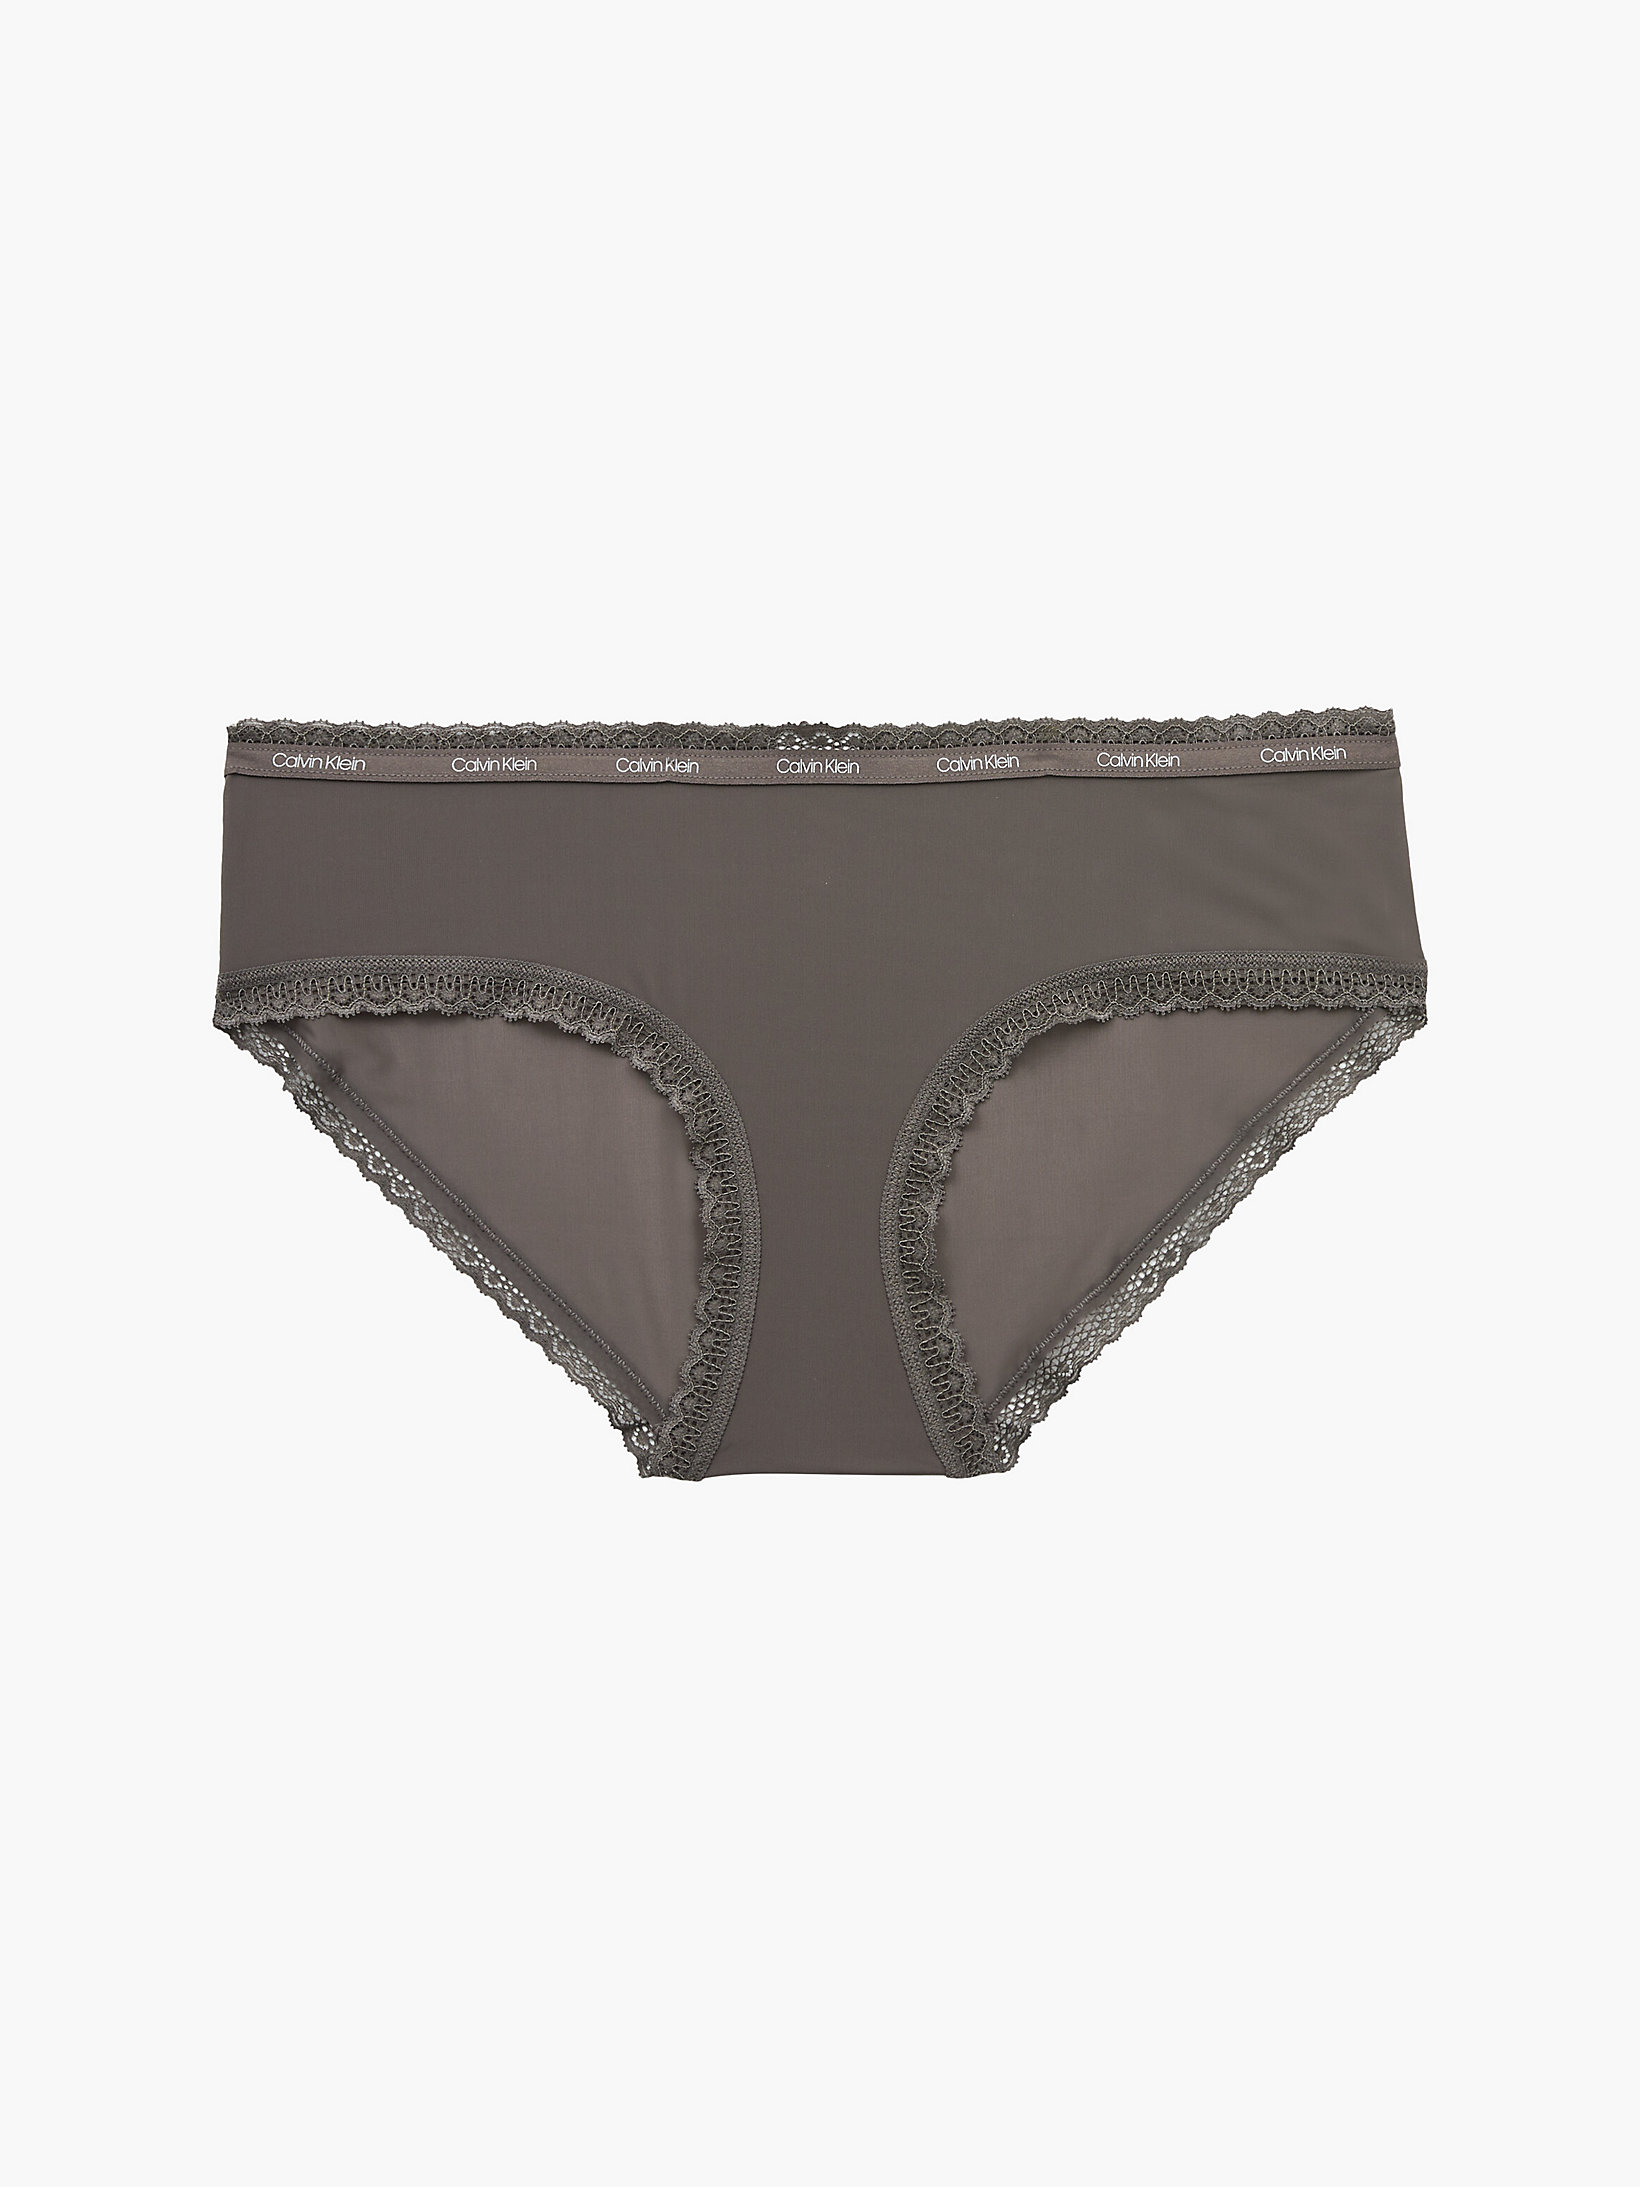 Coal Ash Hipster Panty - Bottoms Up undefined women Calvin Klein